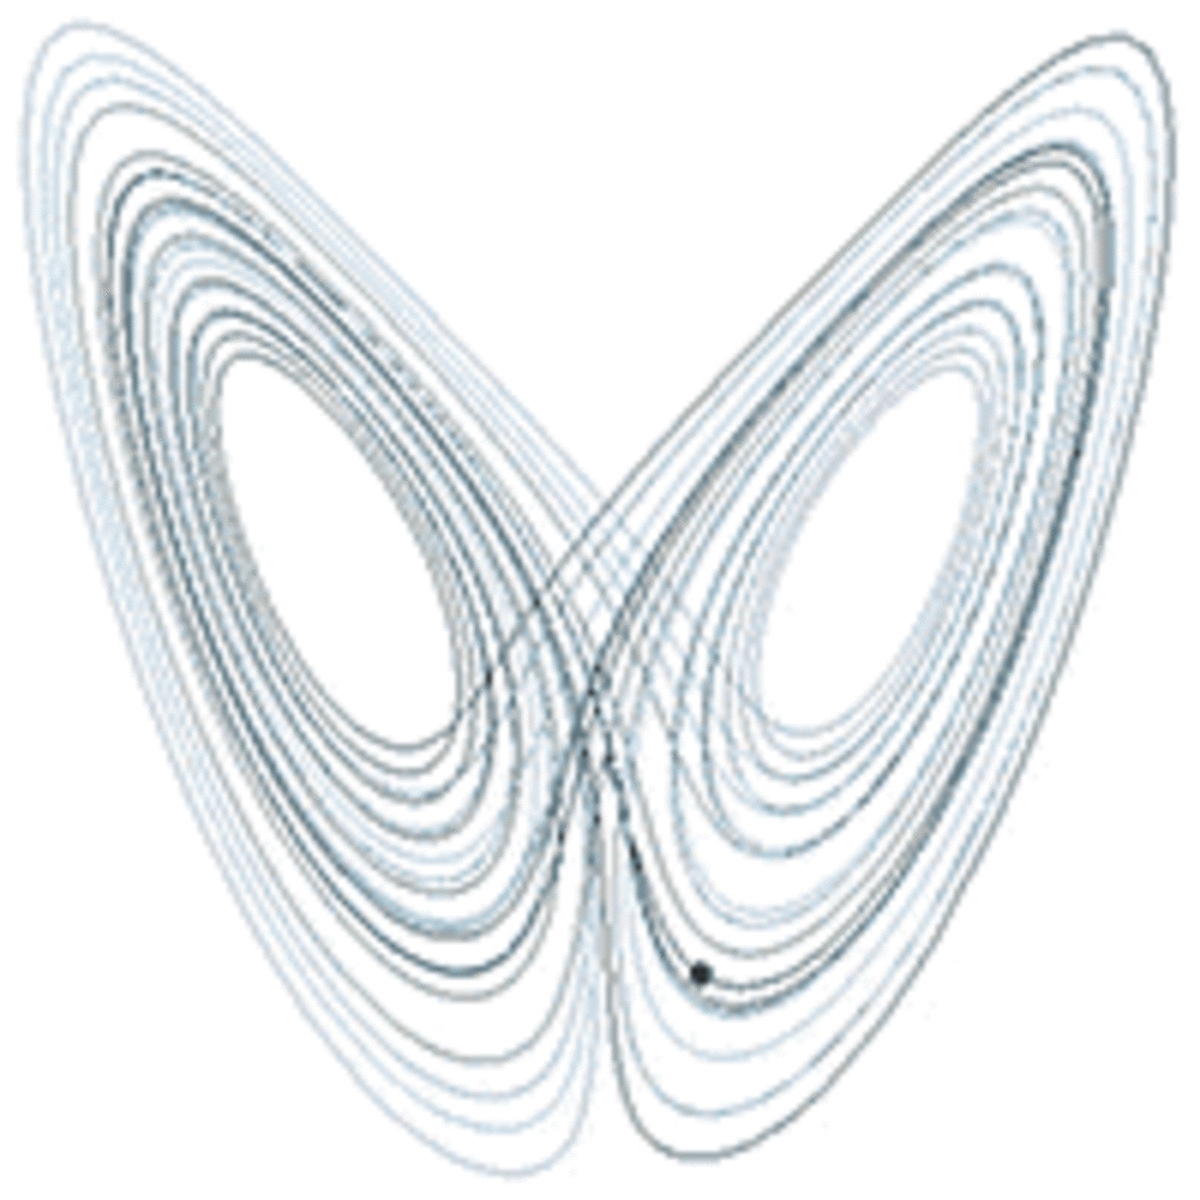 A_Trajectory_Through_Phase_Space_in_a_Lorenz_Attractor.gif (Full)